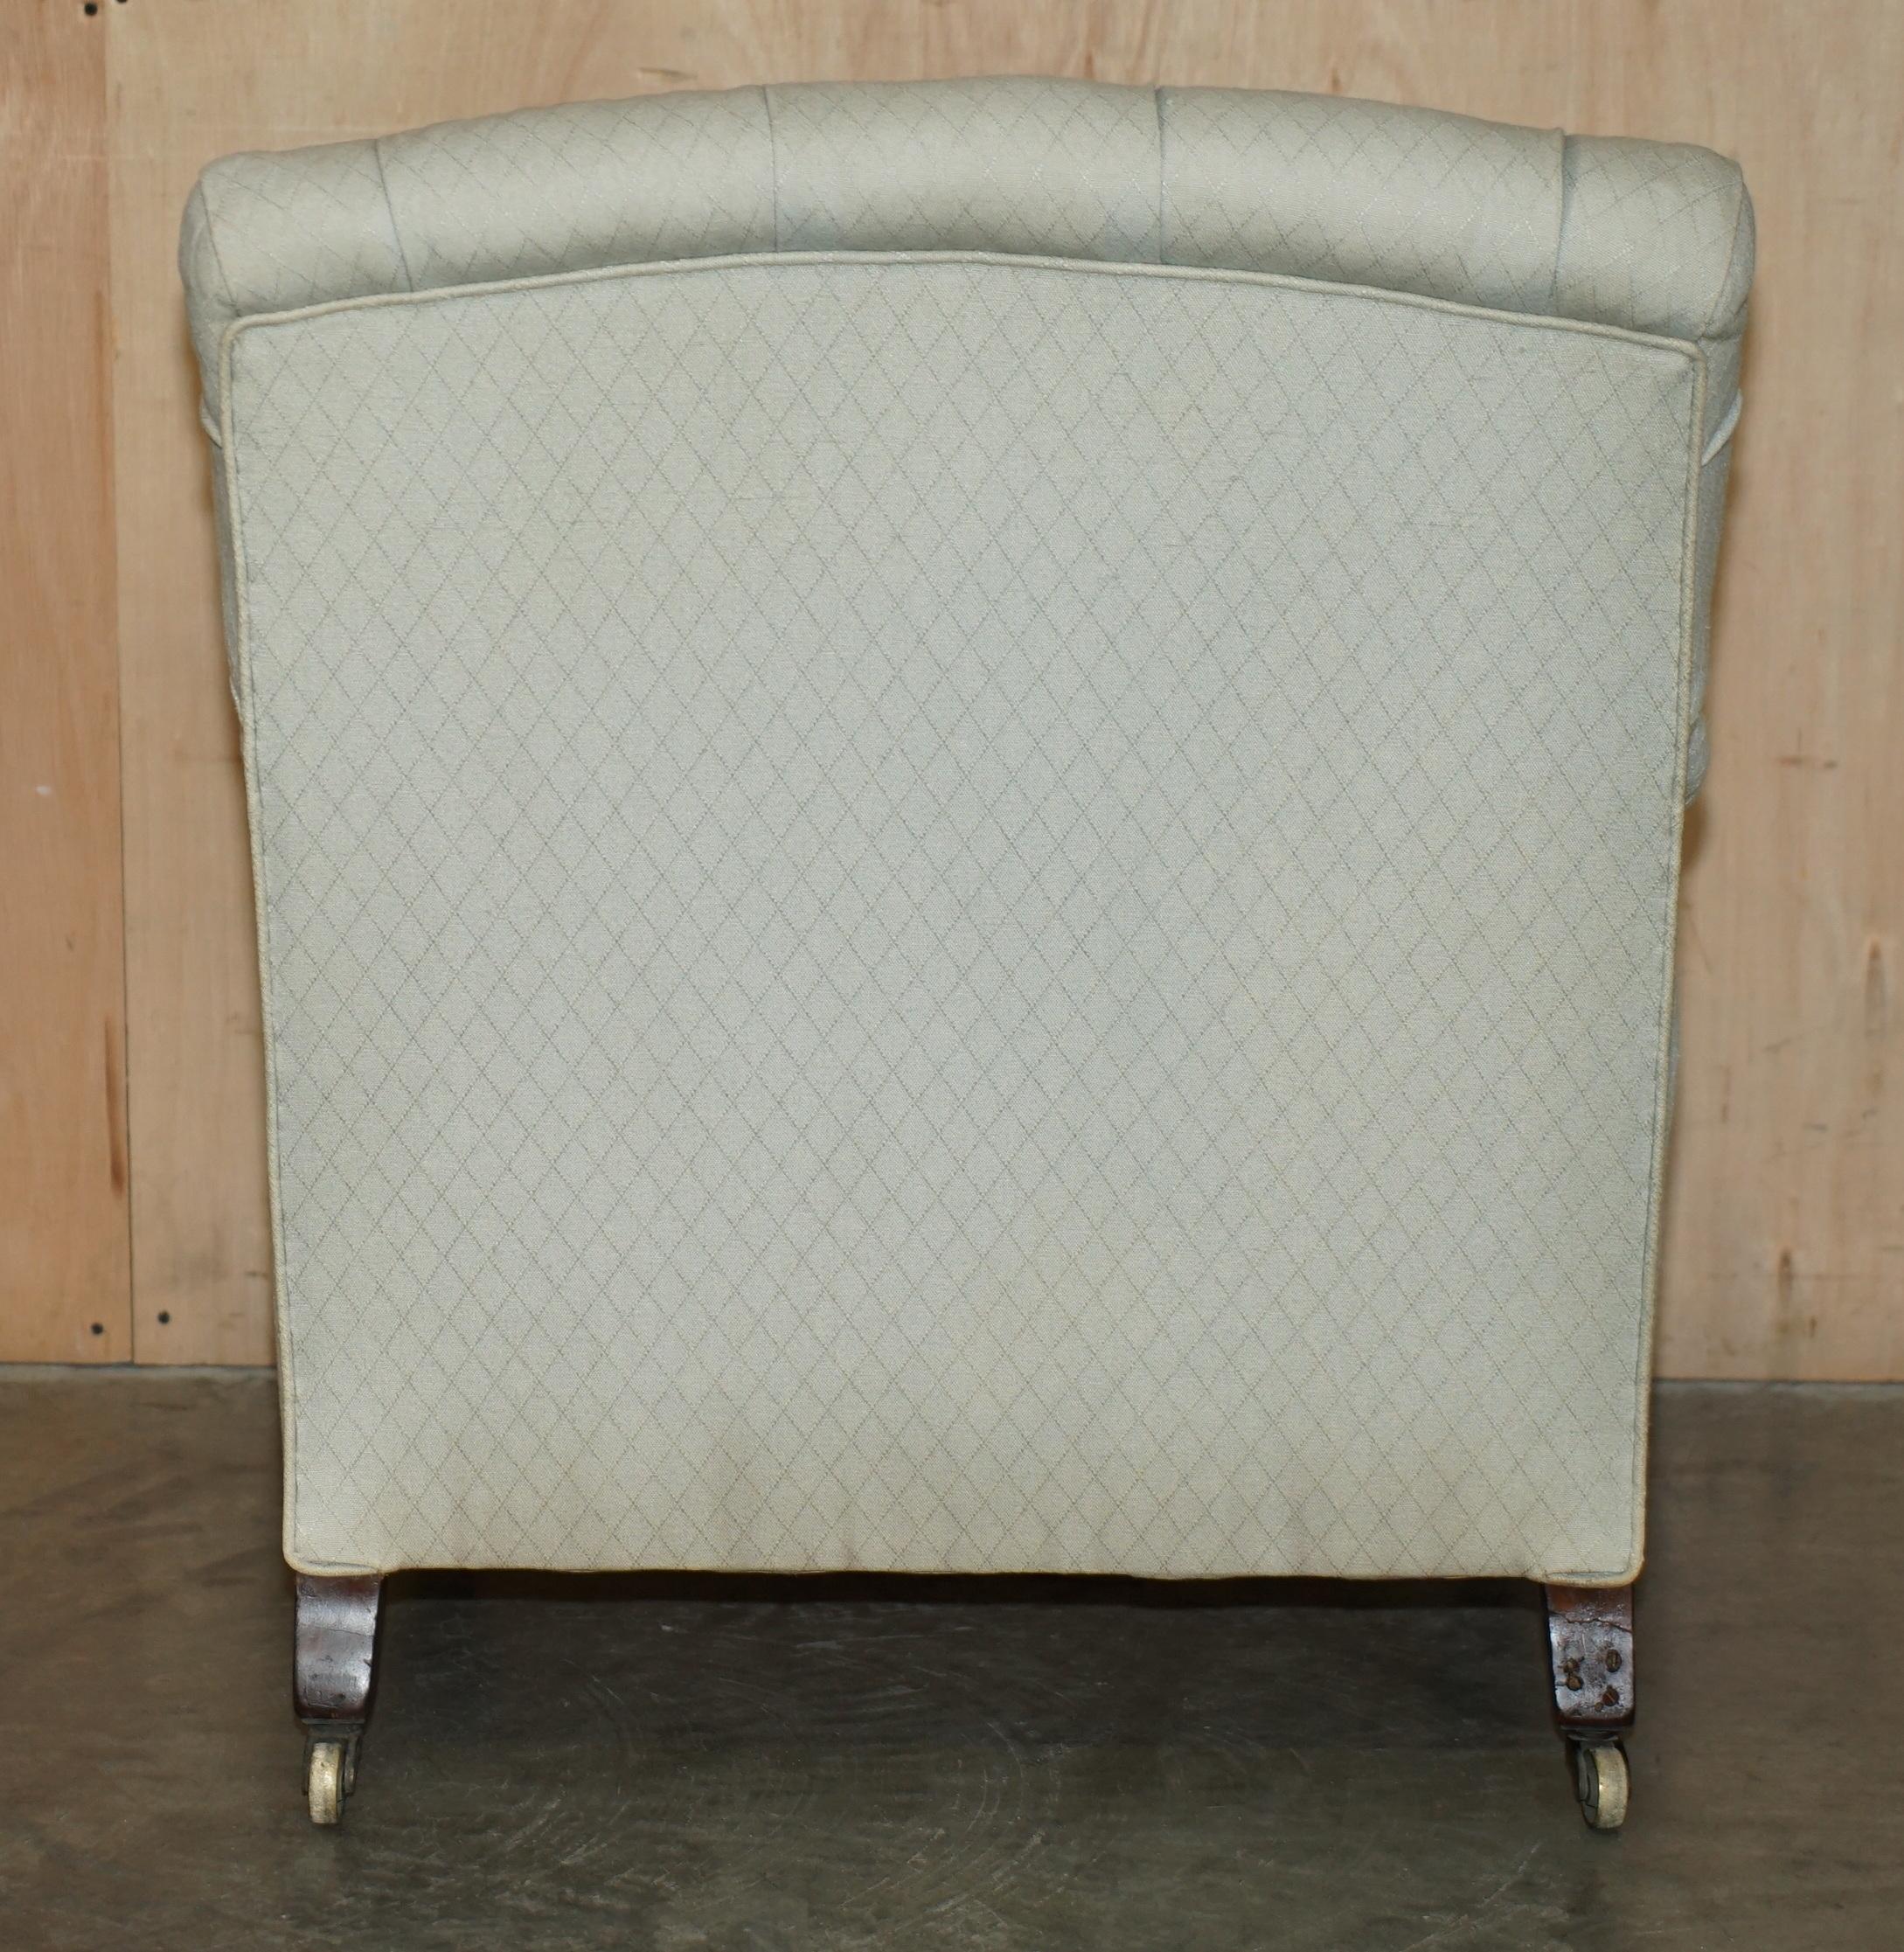 RARE ORIGINAL ViCTORIAN HOWARD & SONS BRIDGEWATER ARMCHAIR PERIOD UPHOLSTERY For Sale 5